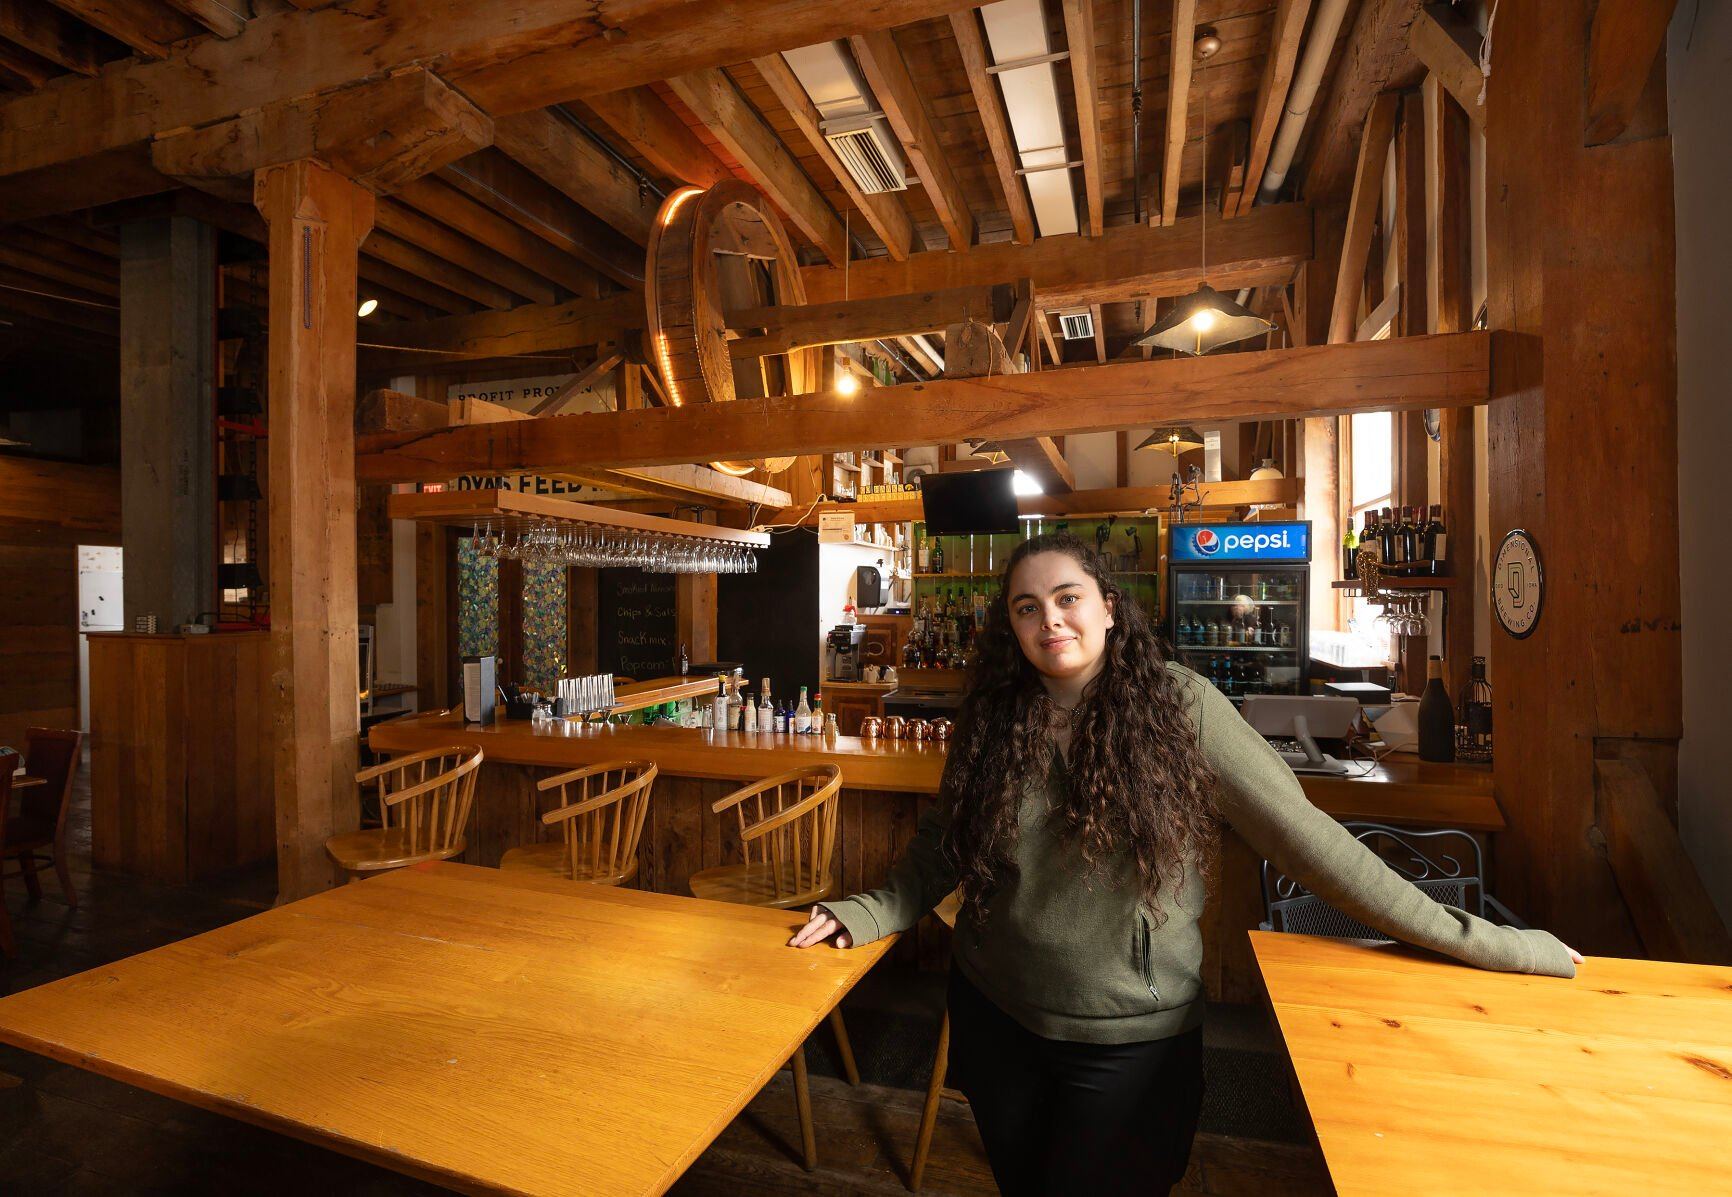 Ellen Herman operates The Tavern at Potter’s Mill, 300 Potter Drive, in Bellevue, Iowa. The bar offers a variety of draft beers, hand-mixed cocktails and simple snacks.    PHOTO CREDIT: Gassman